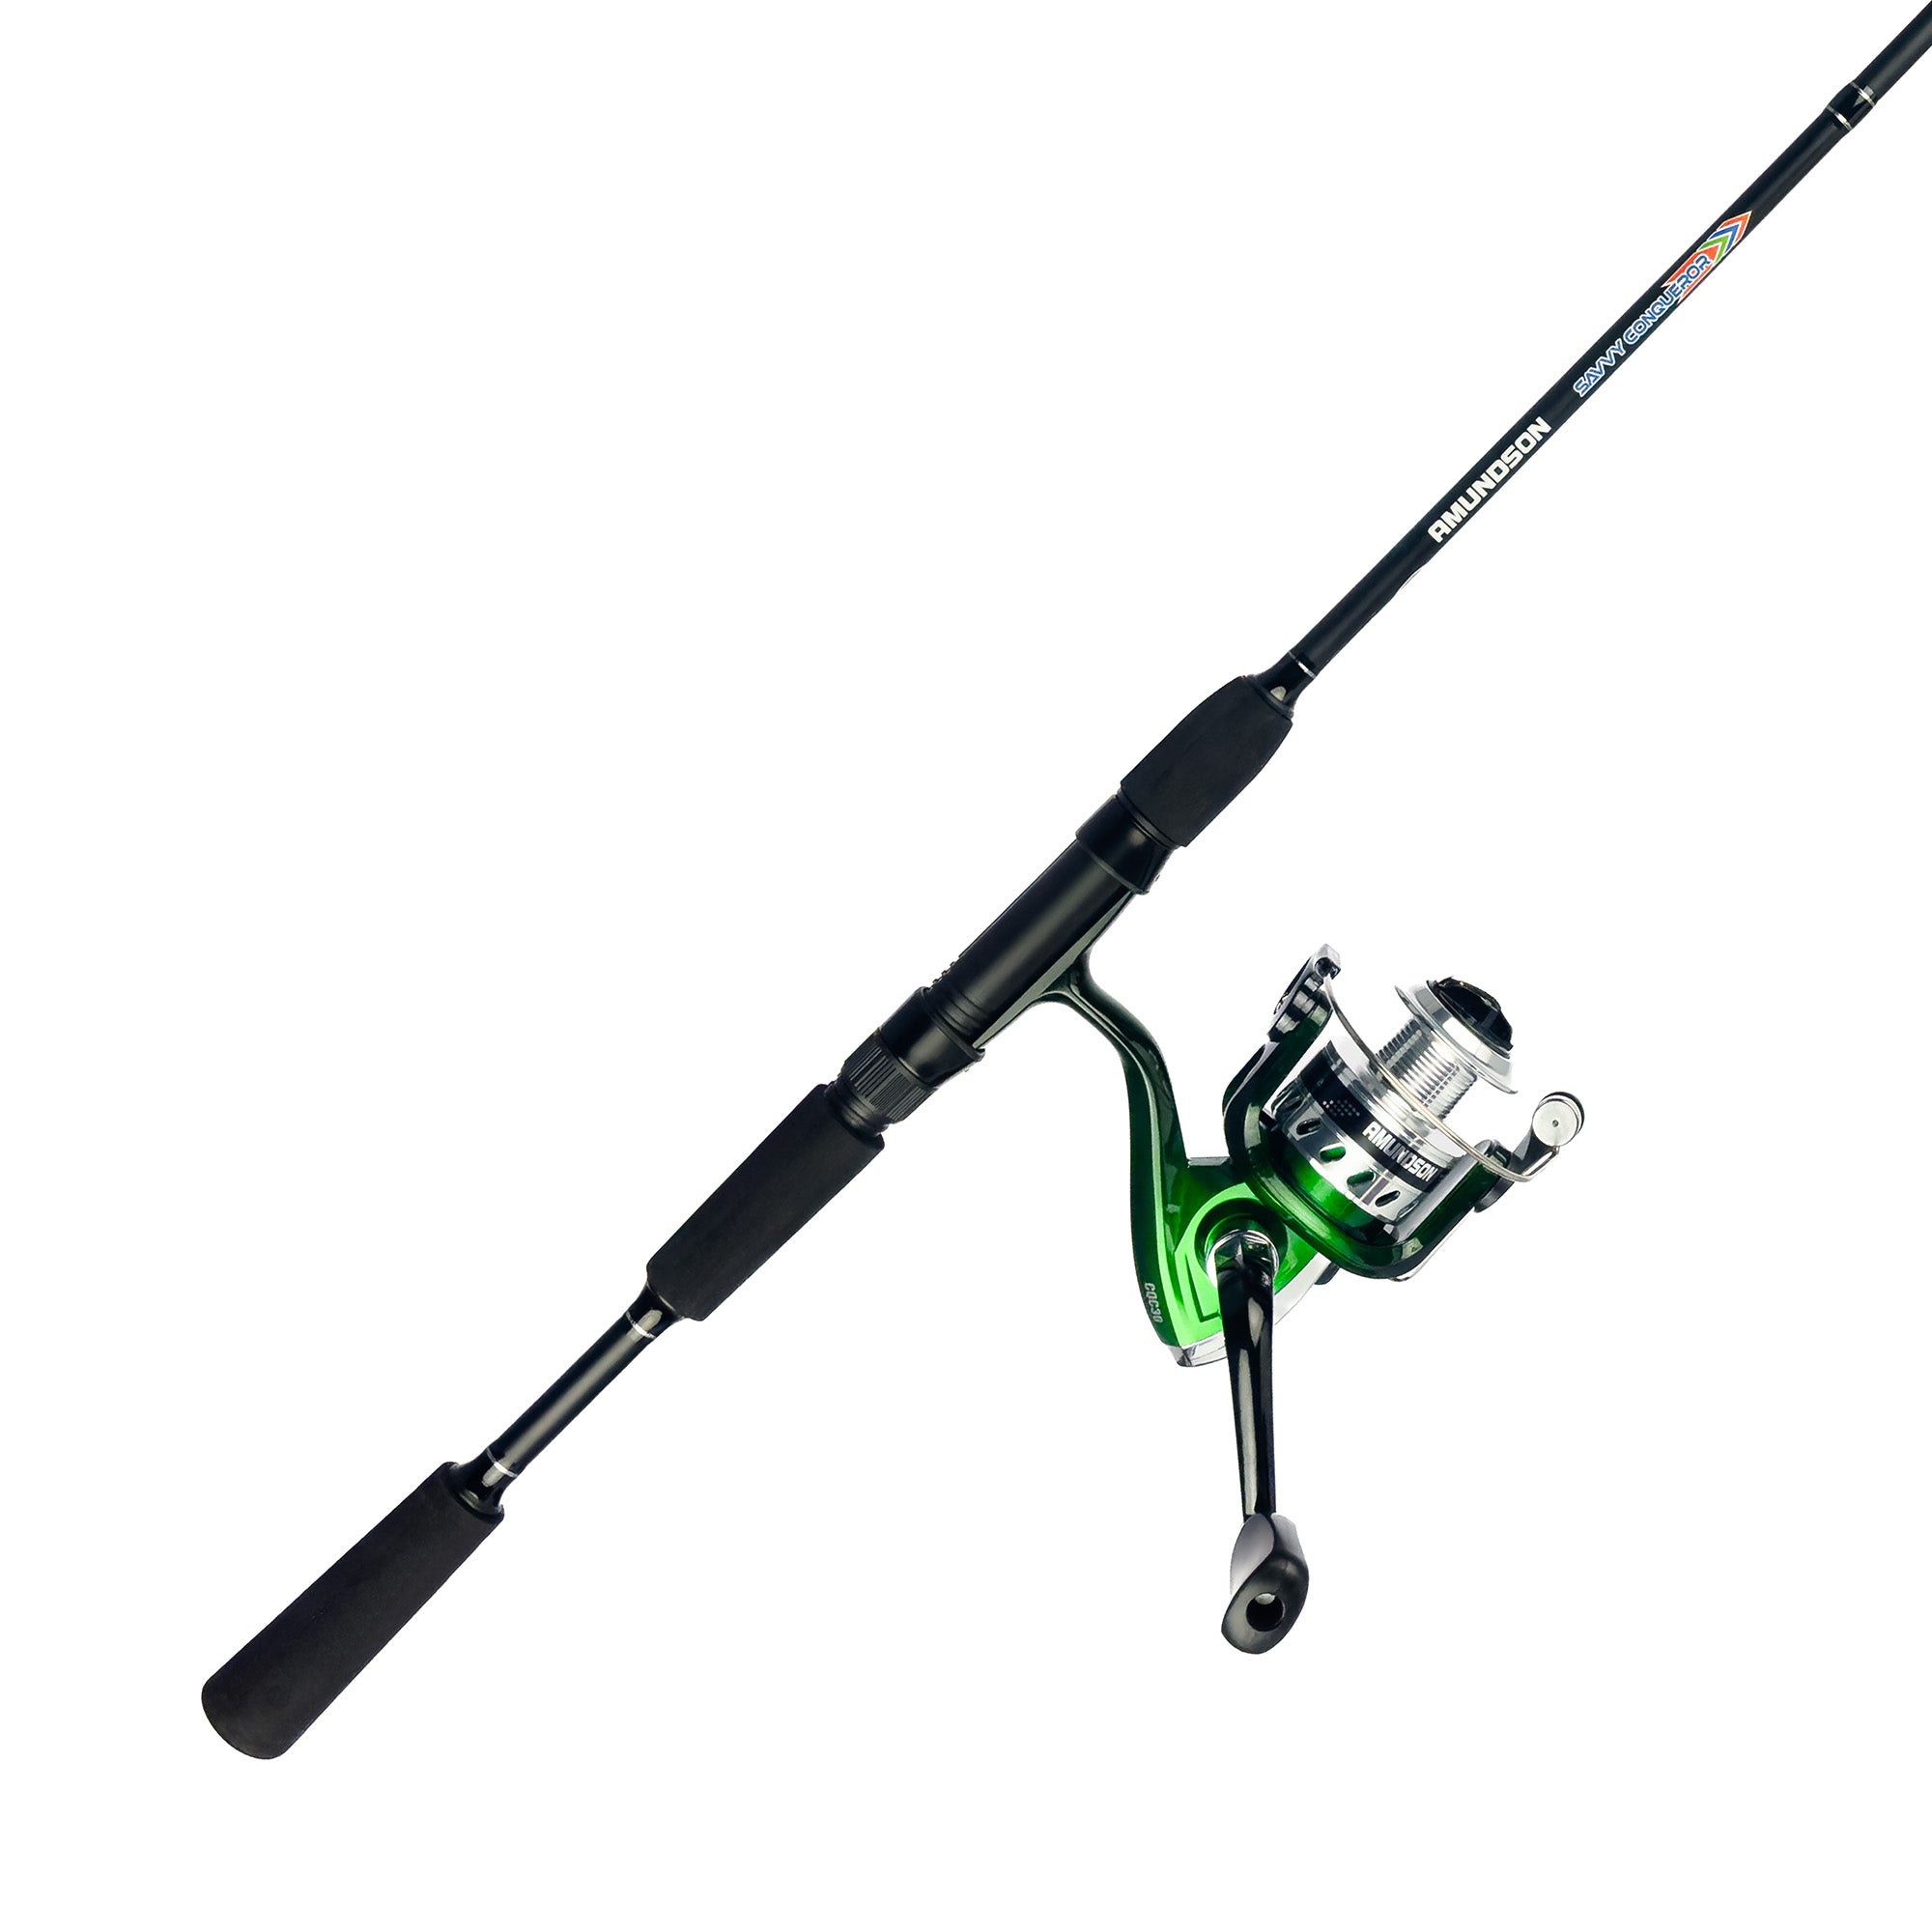 Savvy Conqueror C Spinning Combo